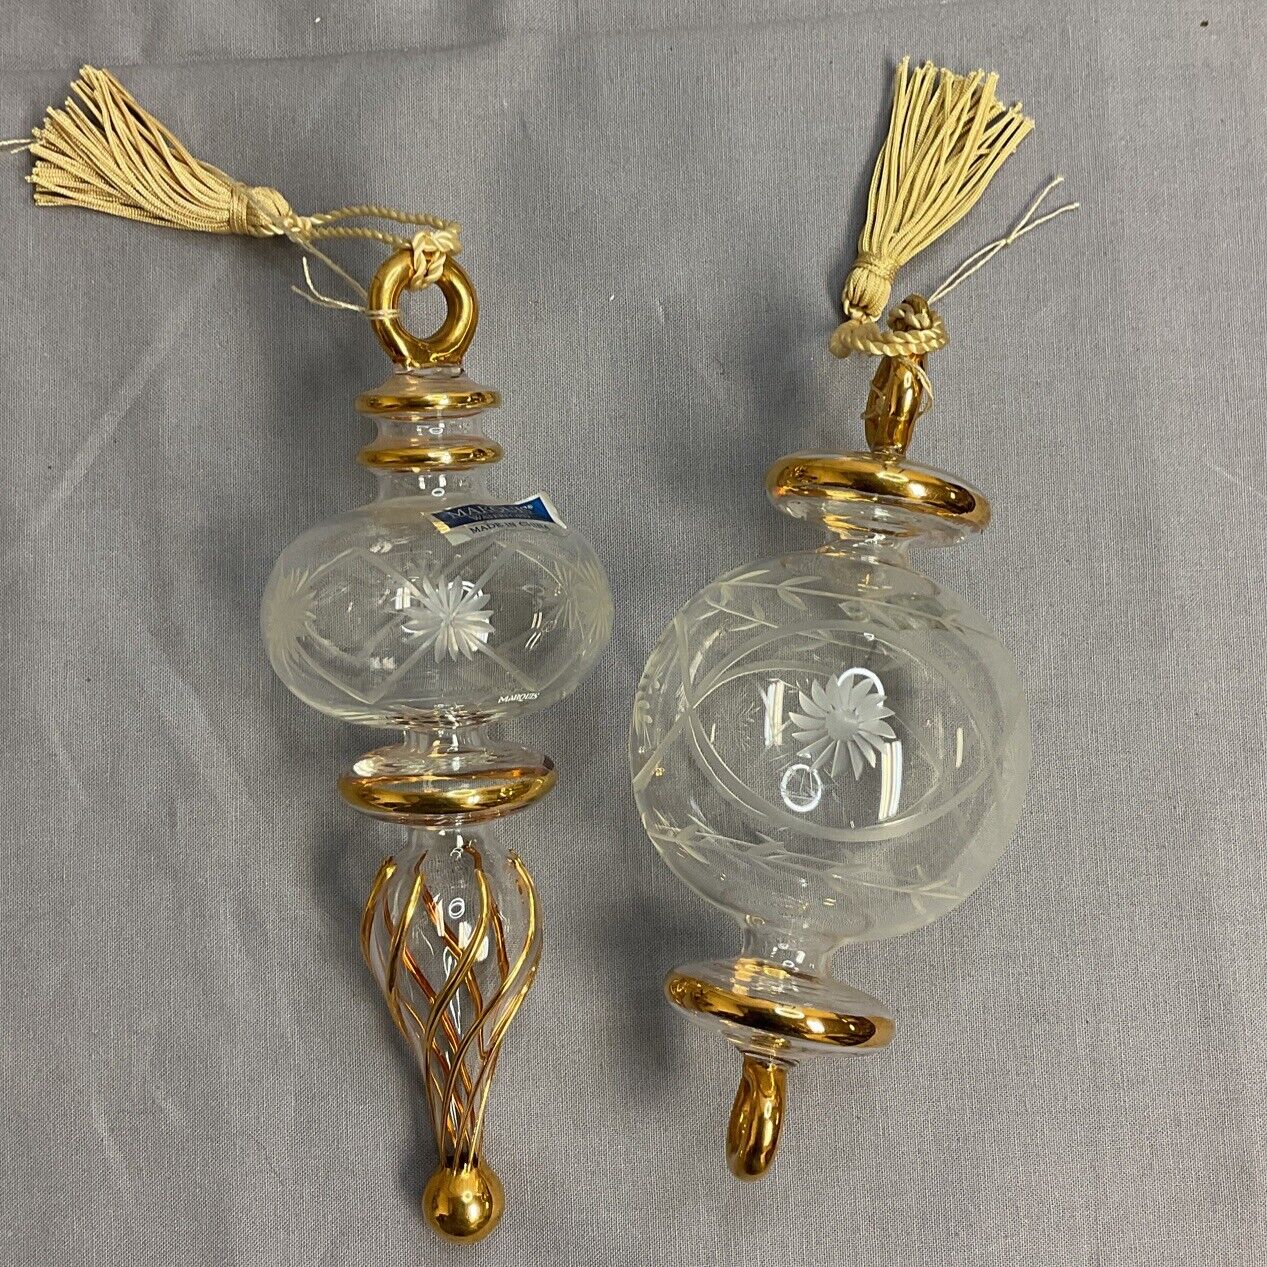 Vintage Marquis Waterford Glass Etched Ornaments Holiday Tassels Gold Accents